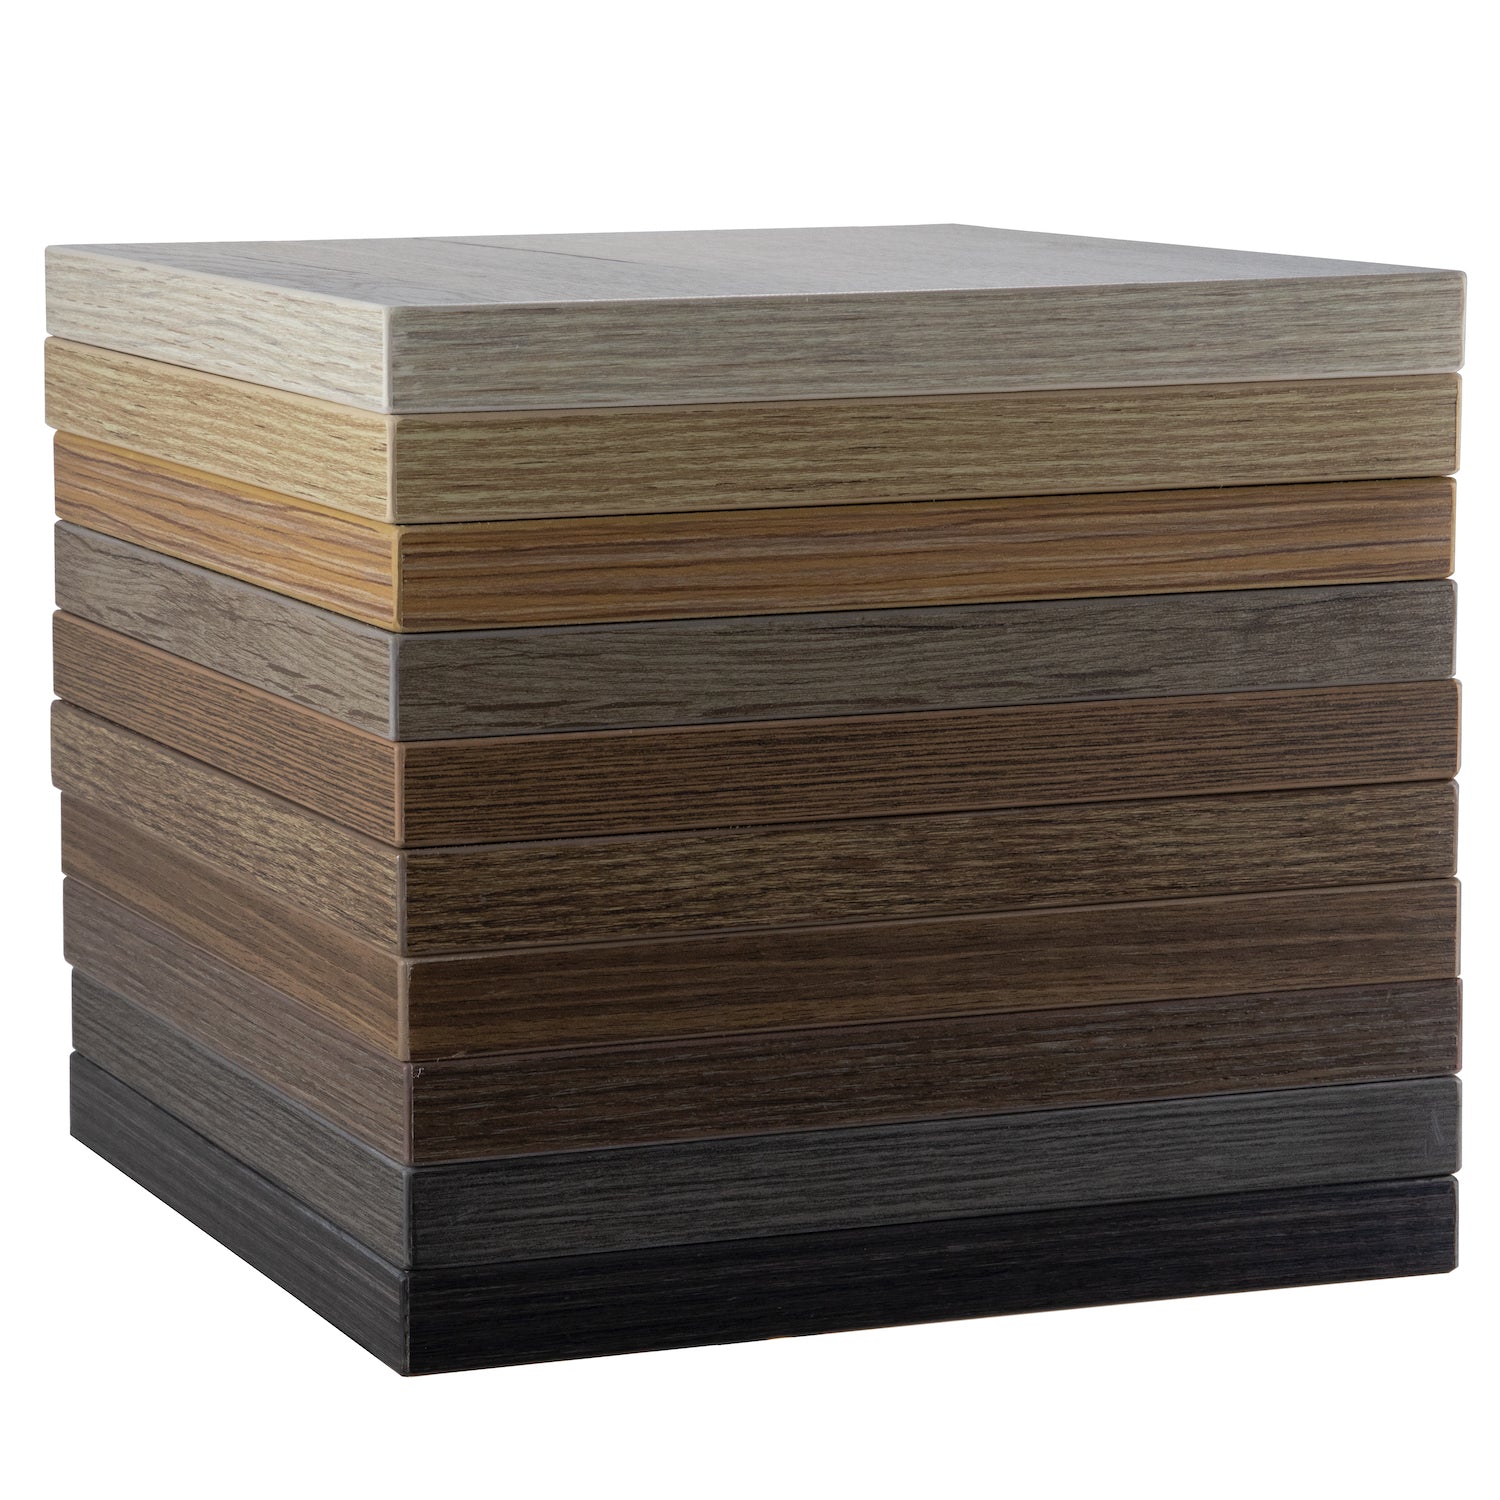 Laminate Table Top c/w ABS Edge-Furniture People-Contract Furniture Store